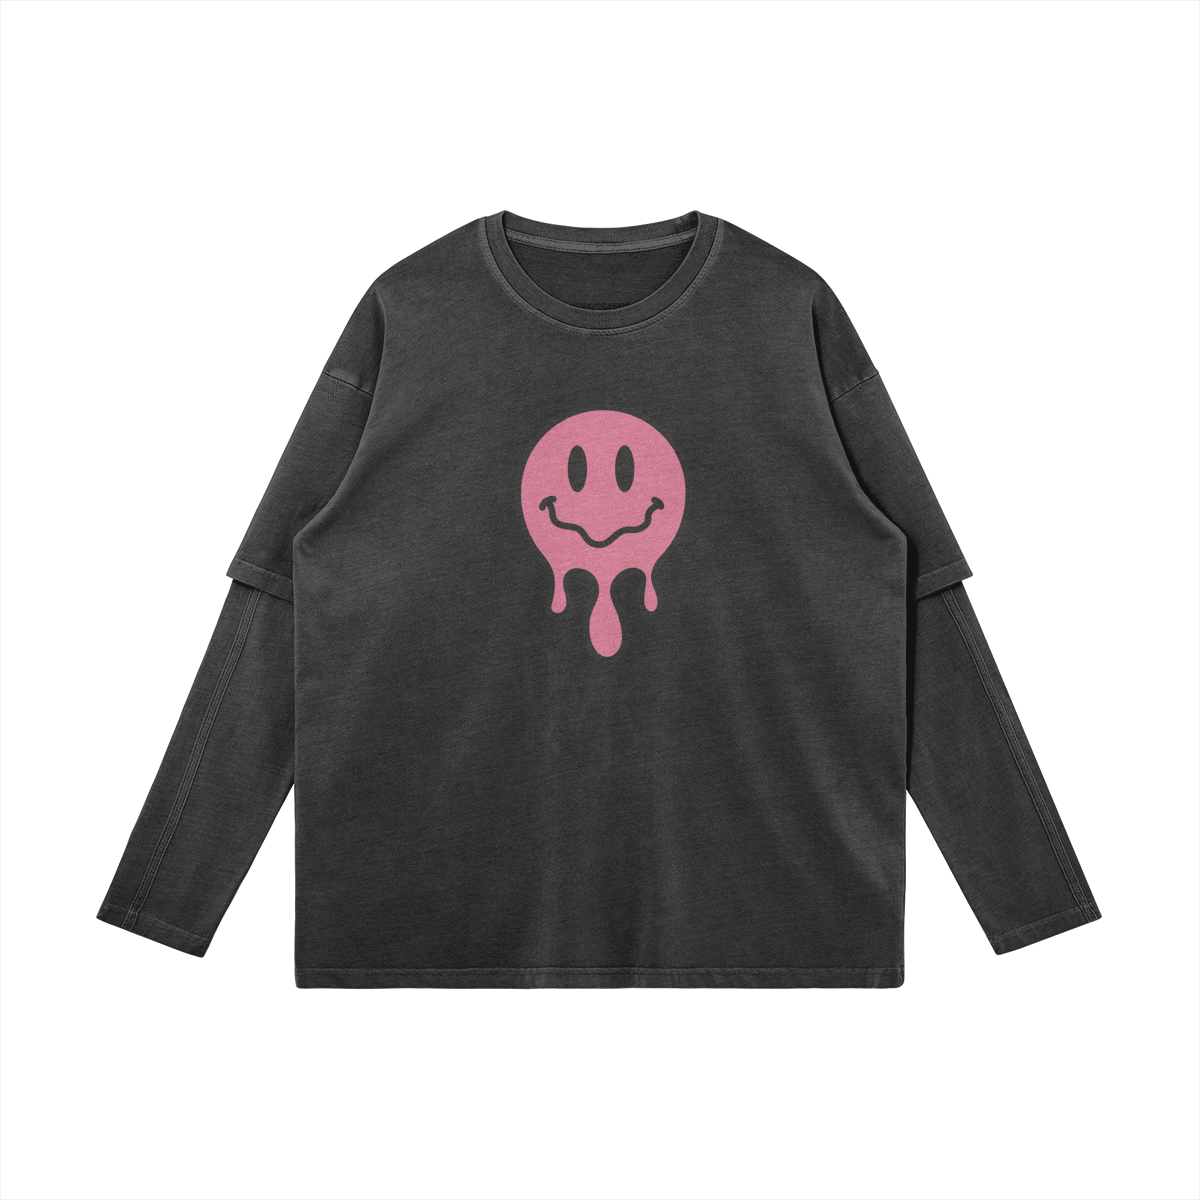 Renaissance Rnsc Pink Smiley Washed Tee